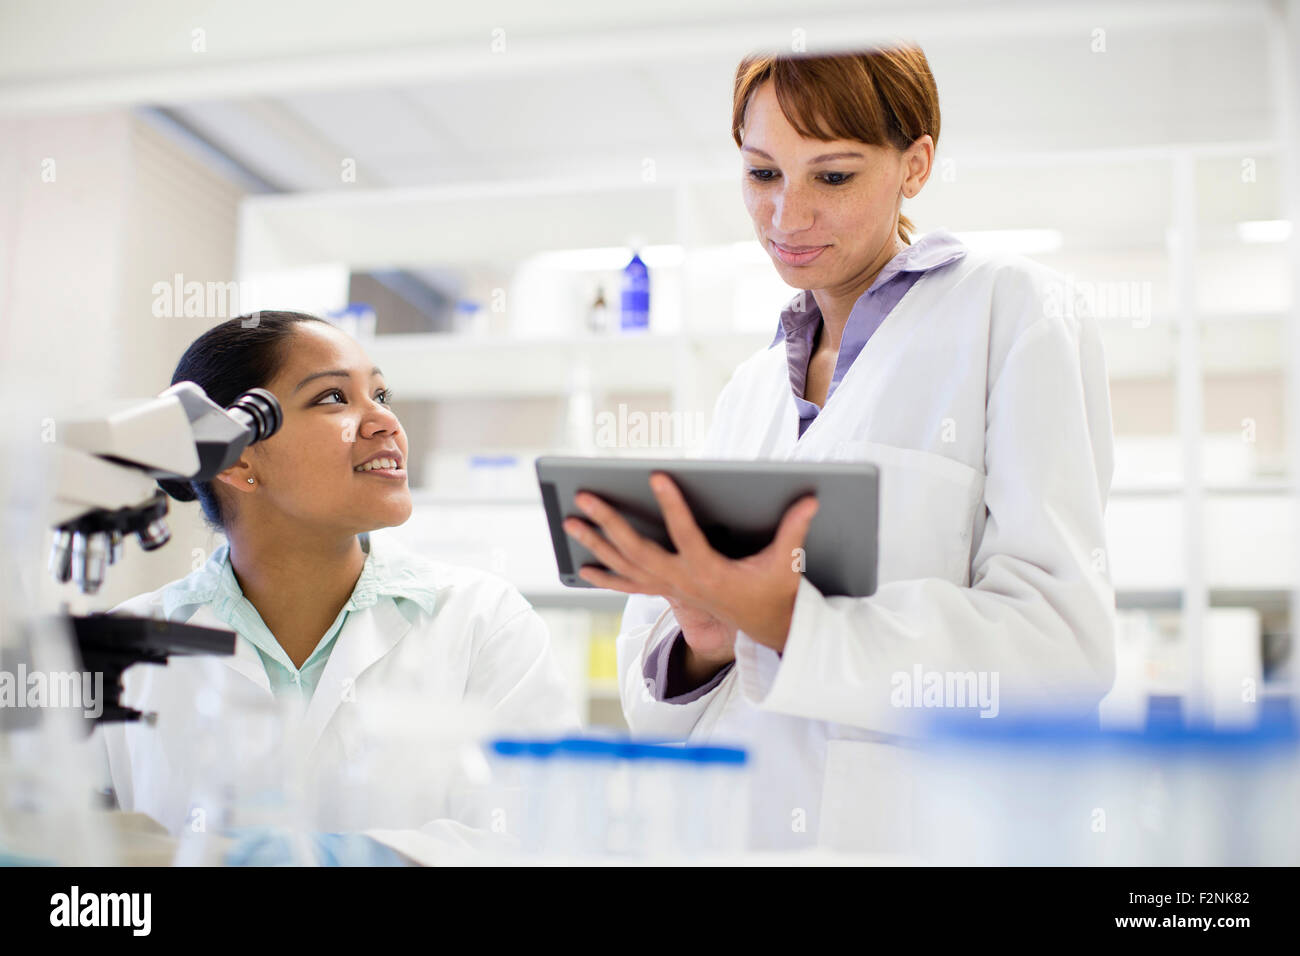 Scientists using digital tablet and microscope in laboratory Stock Photo